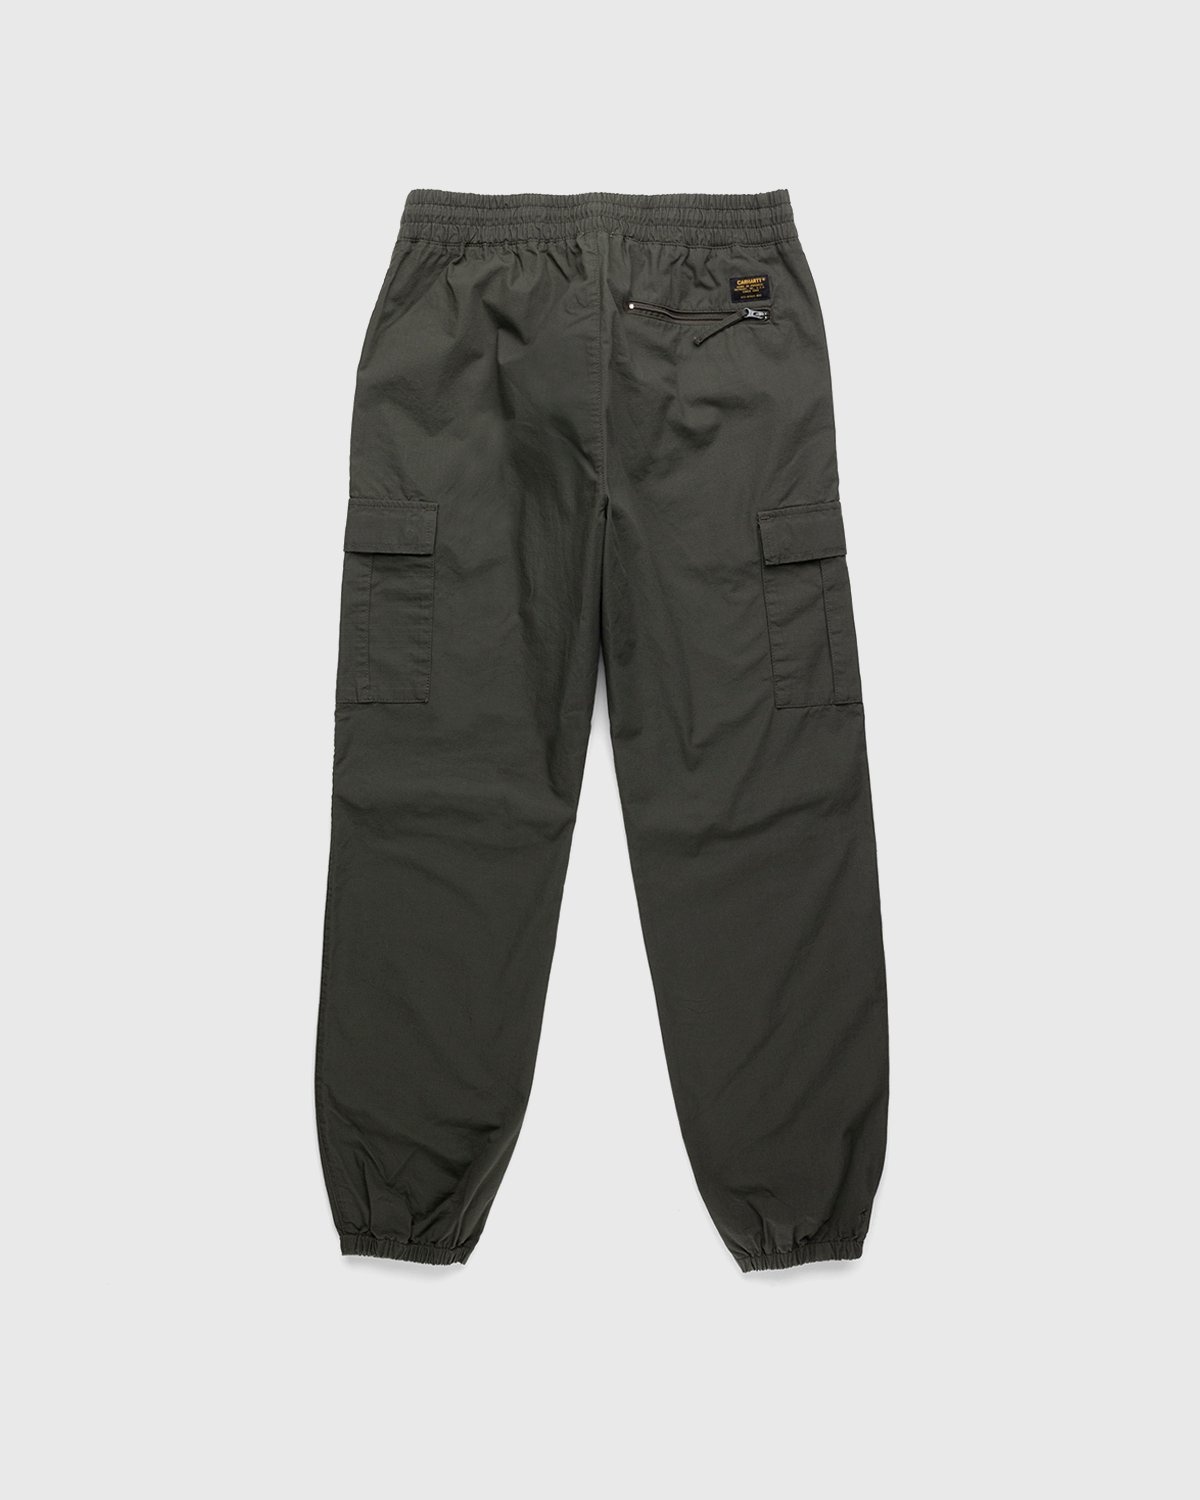 Carhartt WIP – Cargo Jogger Cypress Rinsed - Cargo Pants - Green - Image 2